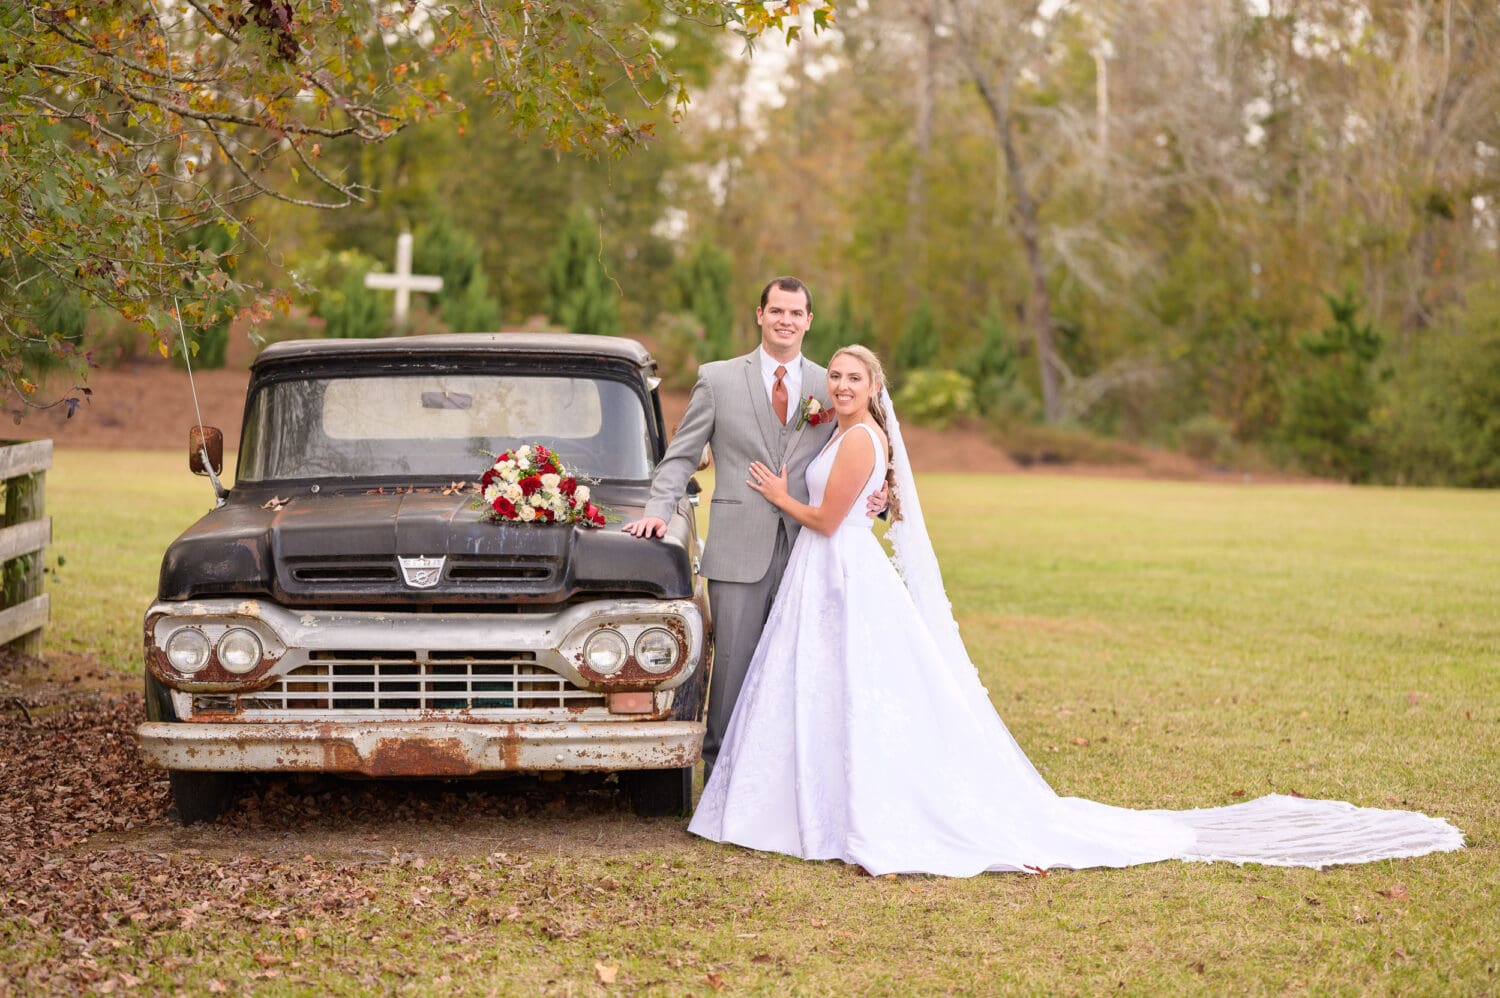 Portraits of the bride and groom around the vintage truck - The Blessed Barn